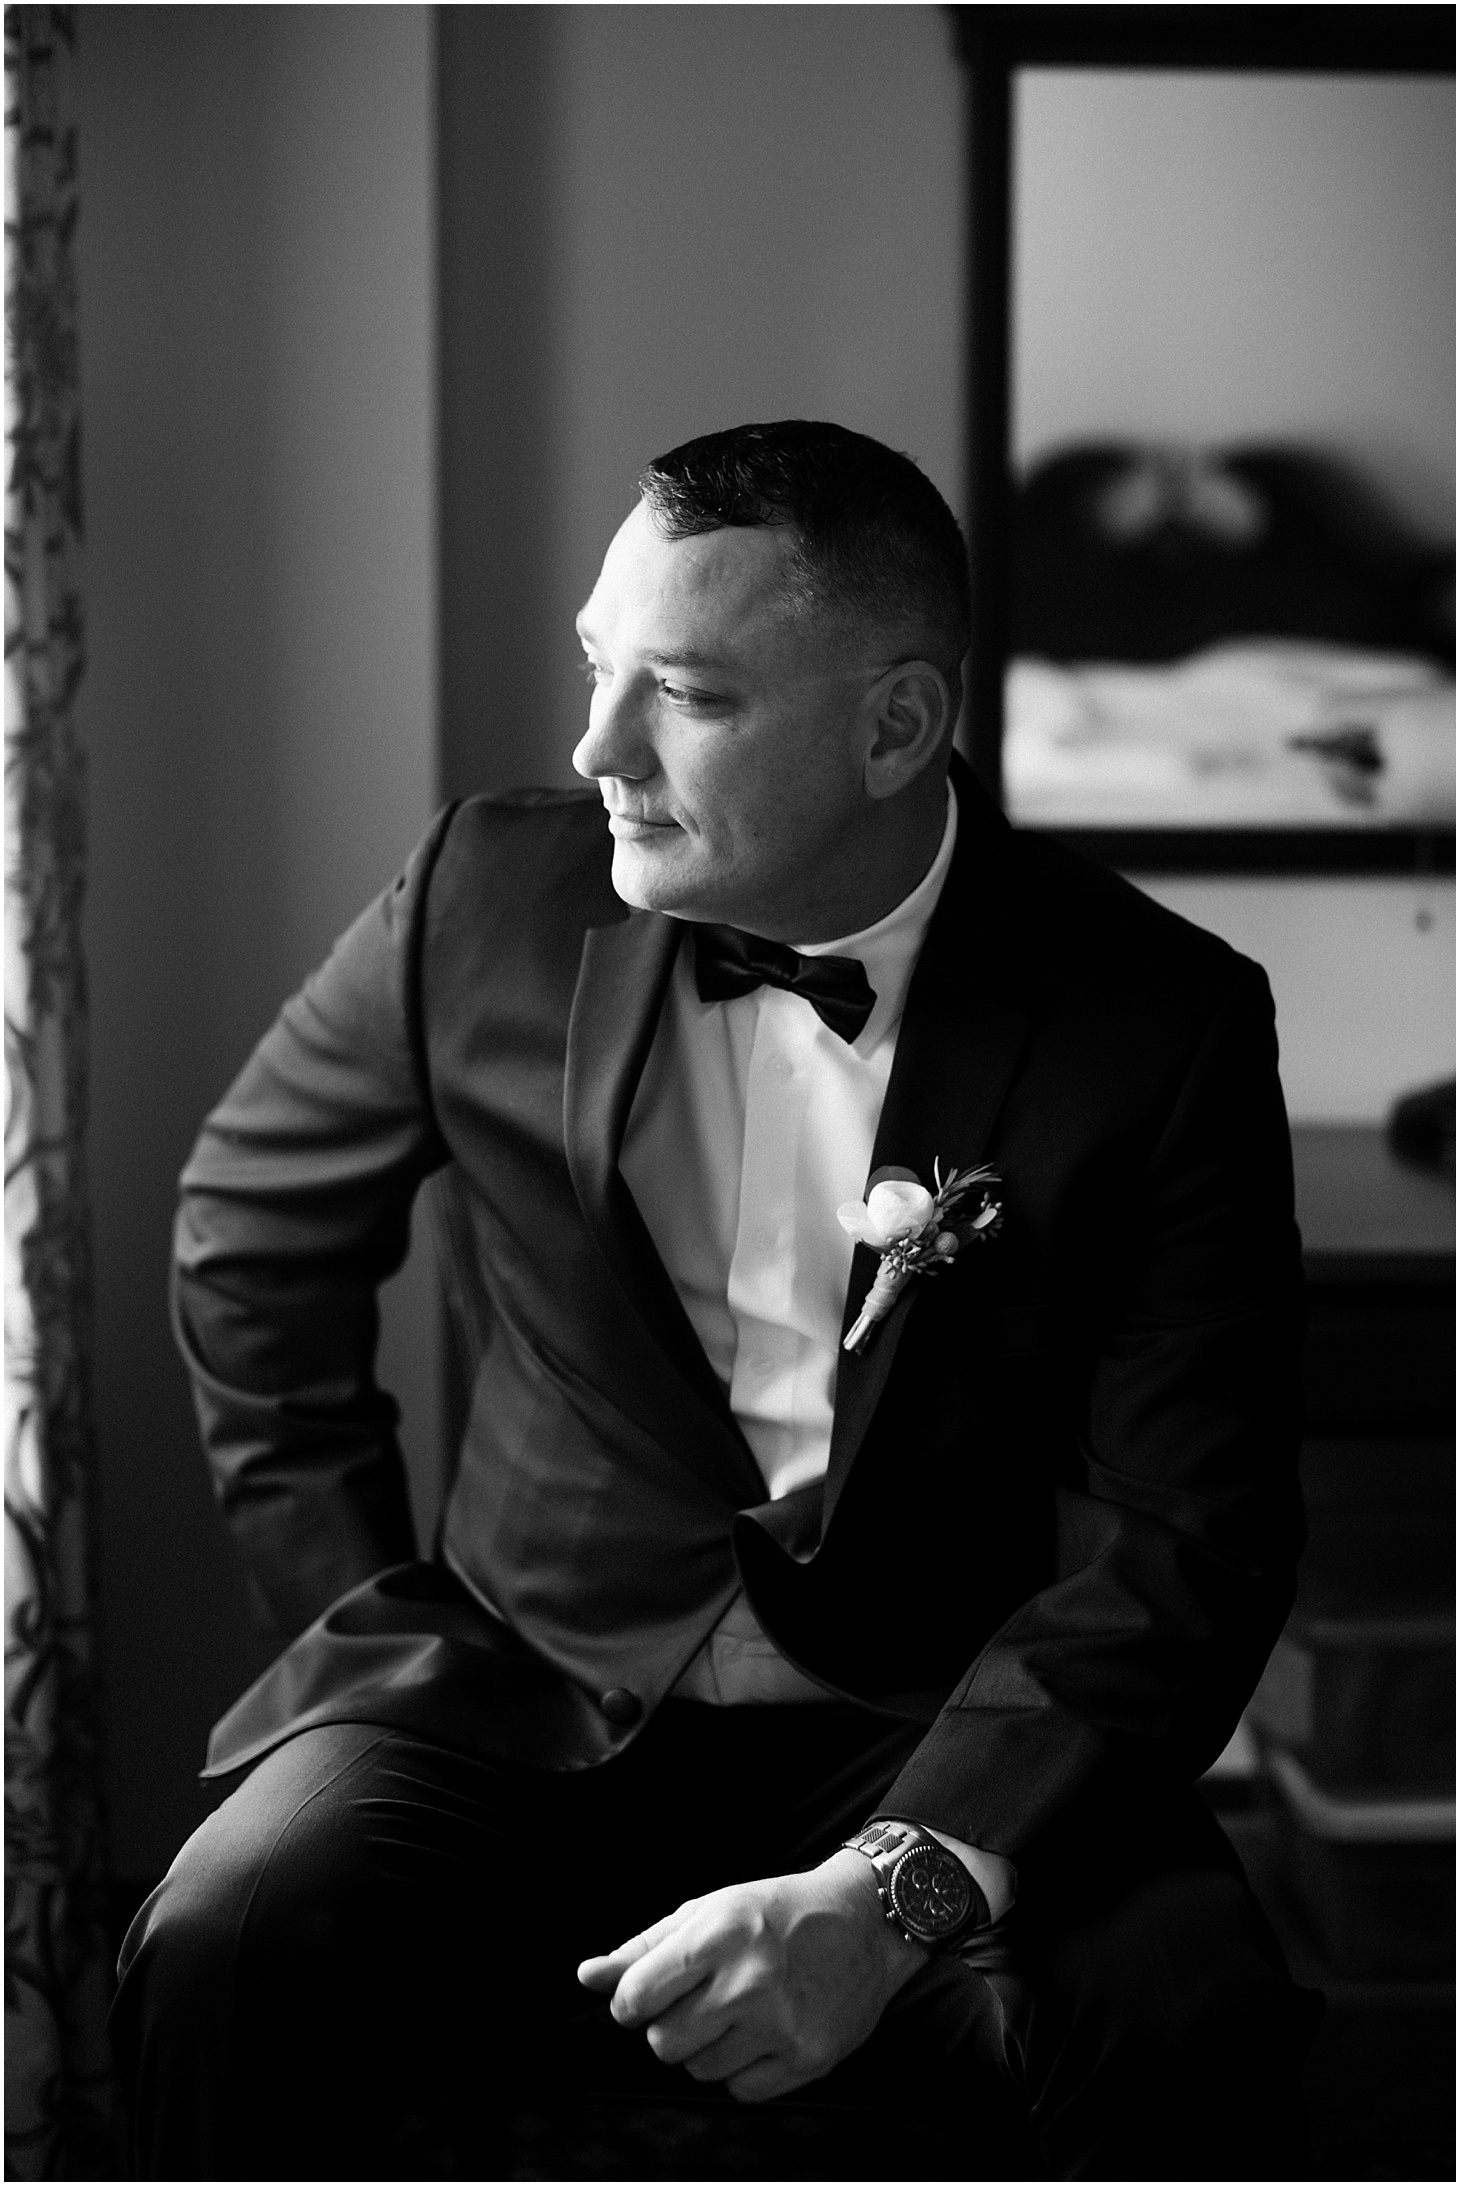 Groom's Portrait at the Army and Navy Club | Luxe Winter Wedding in Washington, DC | Sarah Bradshaw Photography | Washington DC Wedding Photographer